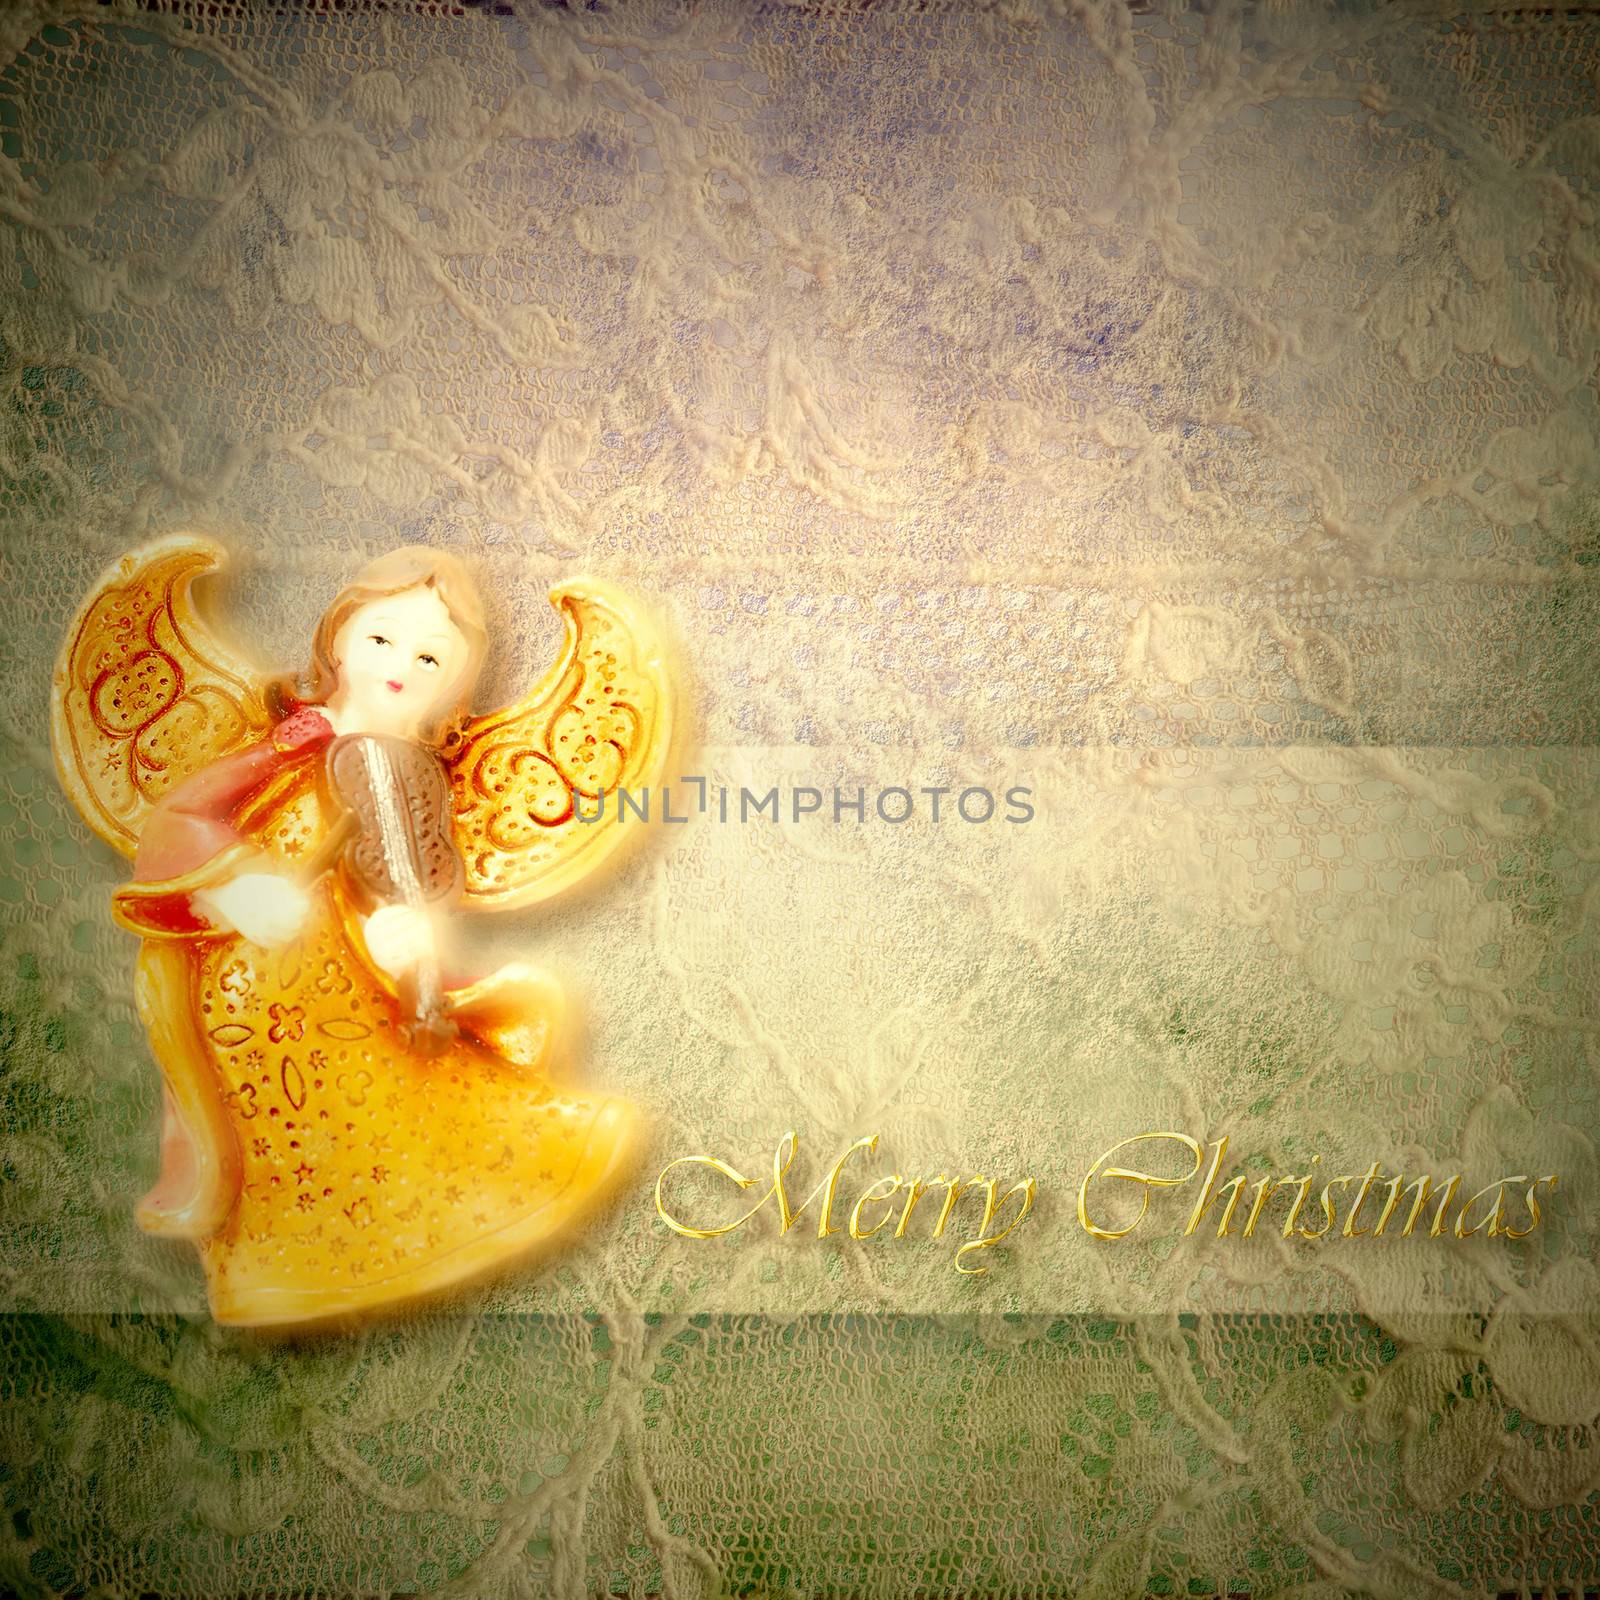 Angel musician on lace background with merry christmas text in gold letters